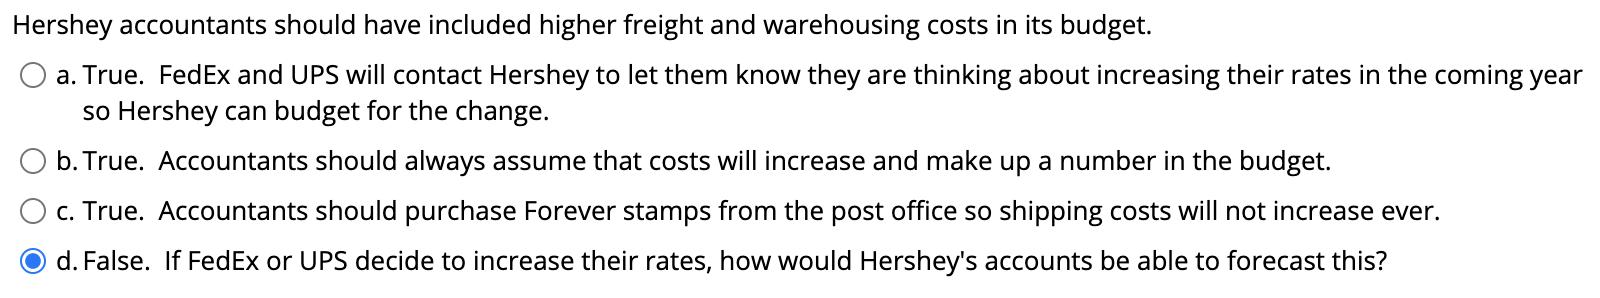 Hershey accountants should have included higher freight and warehousing costs in its budget. a. True. FedEx and UPS will cont